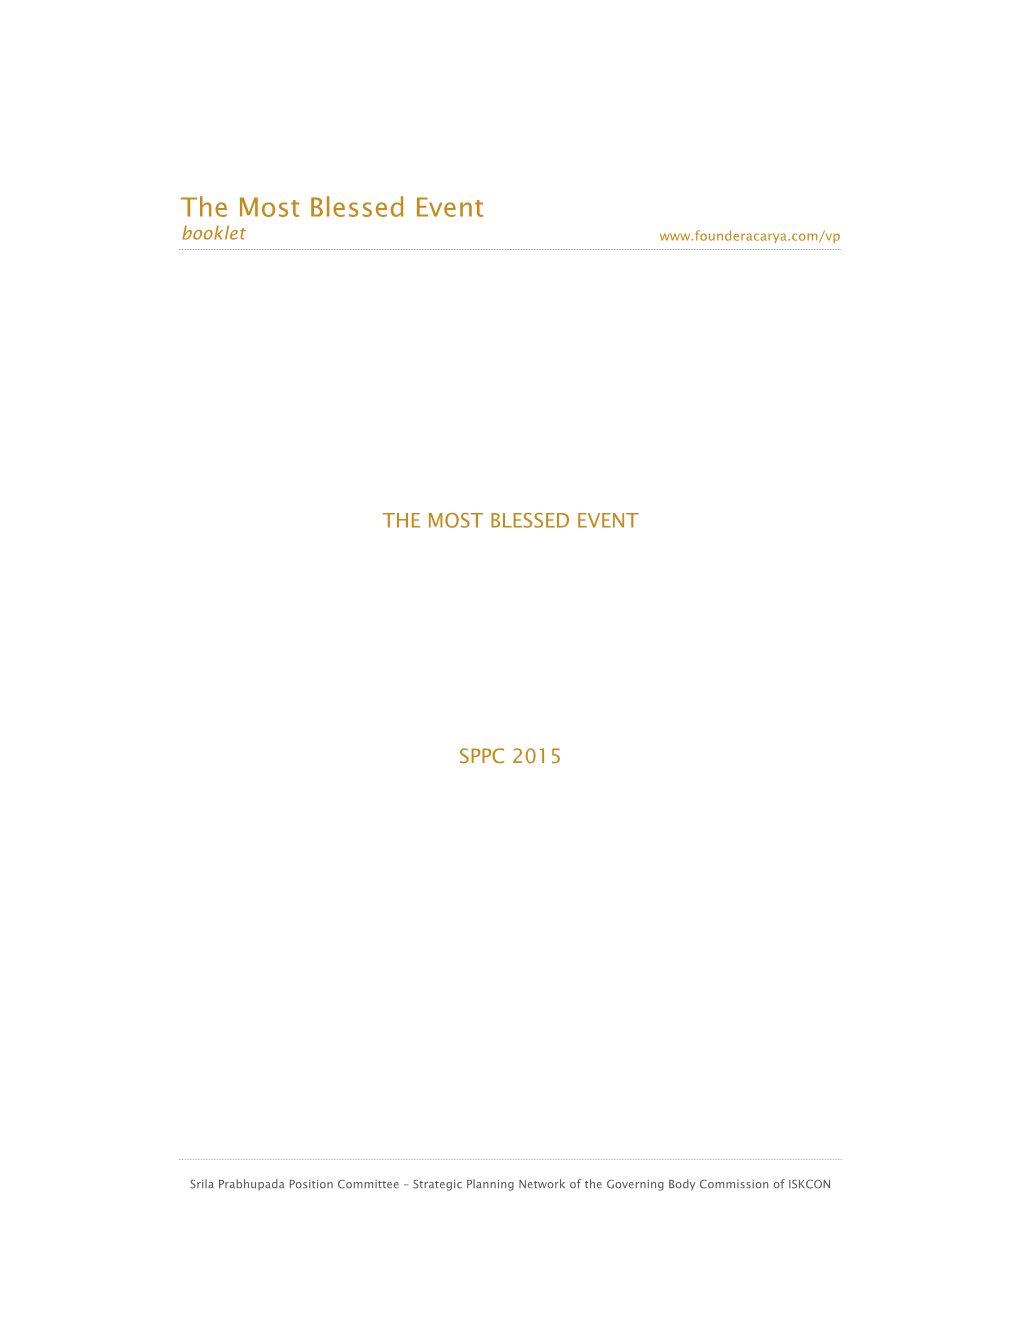 The Most Blessed Event Booklet